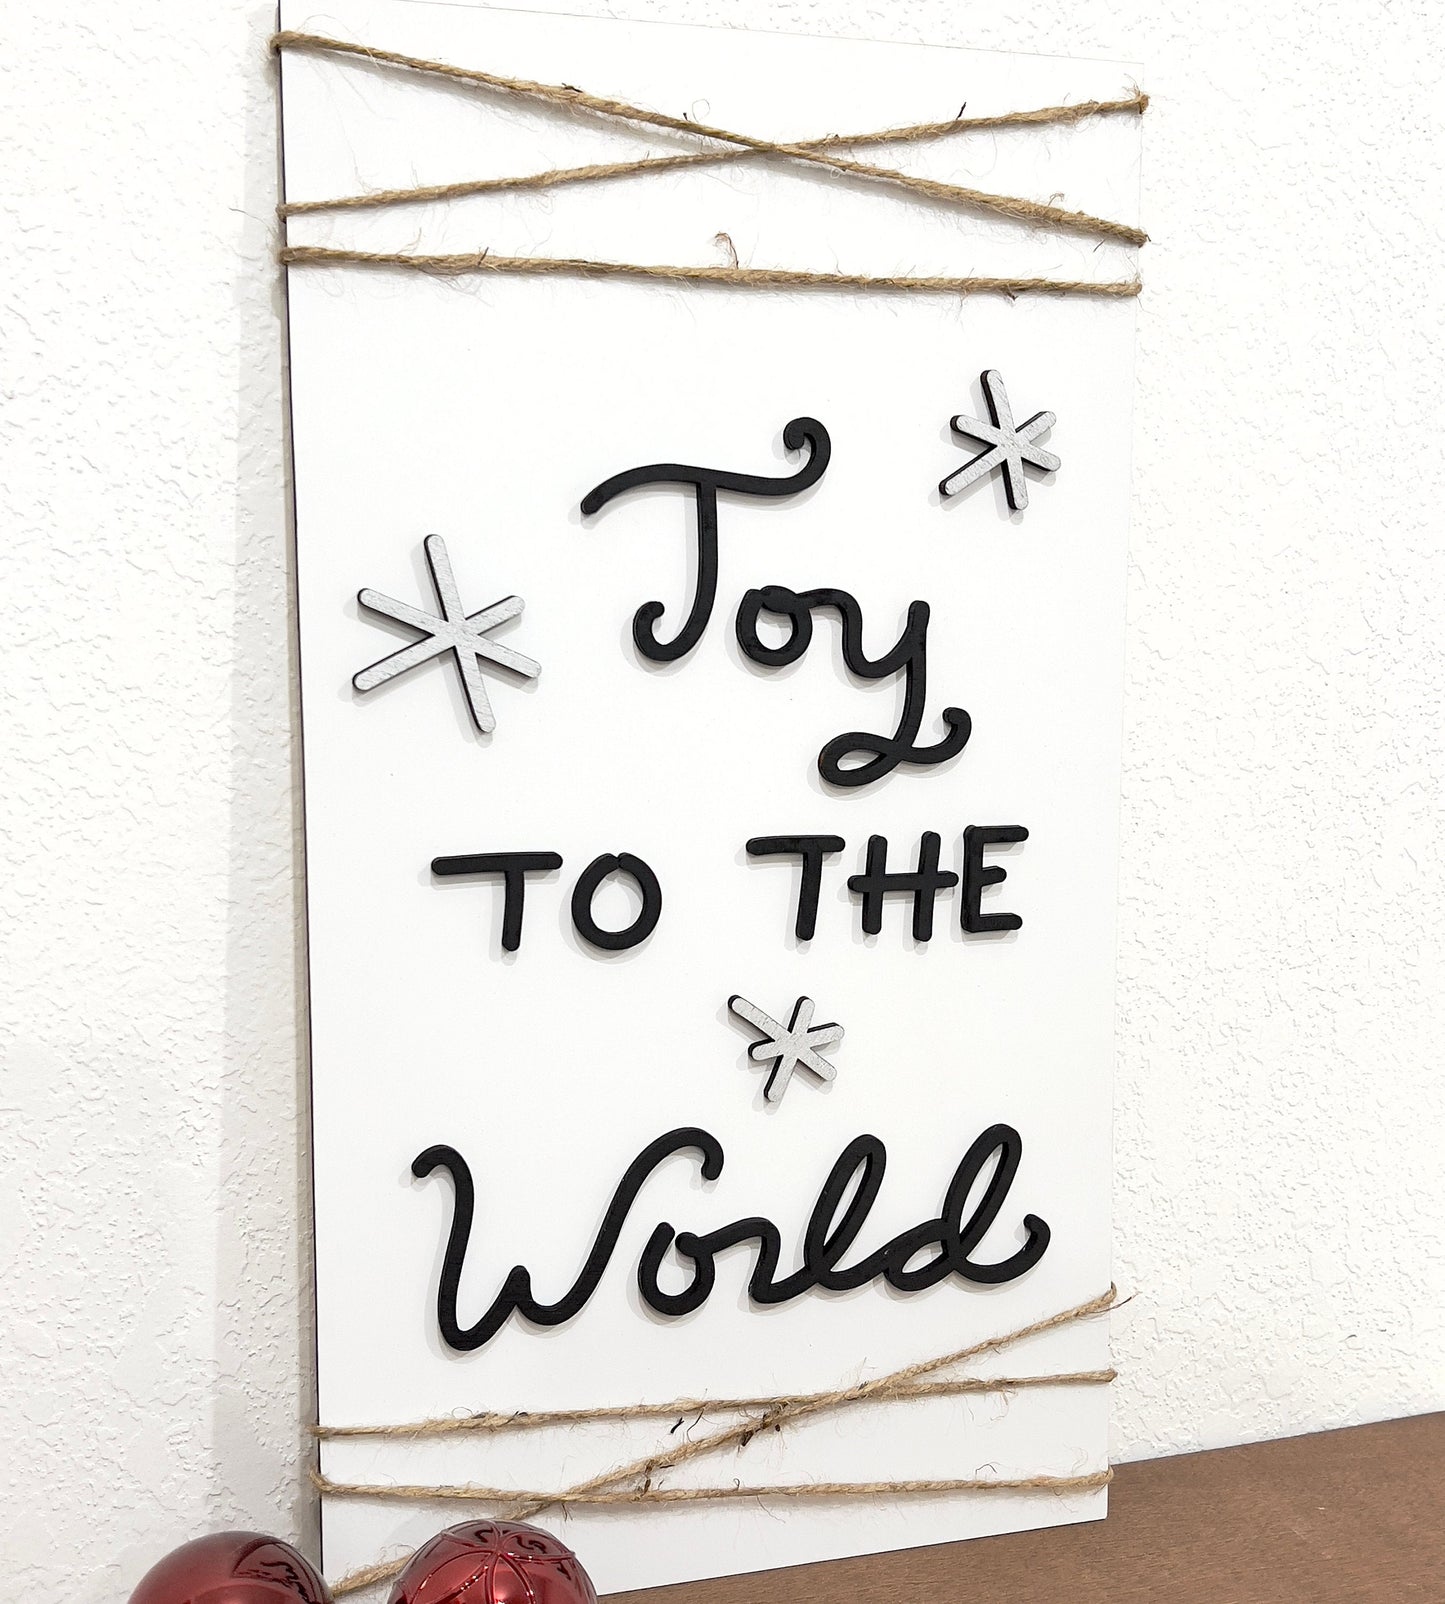 Joy to the world sign kit, DIY holiday crafts, winter sign making supplies, evergreen trees kid craft project ideas, paint party sign bundle